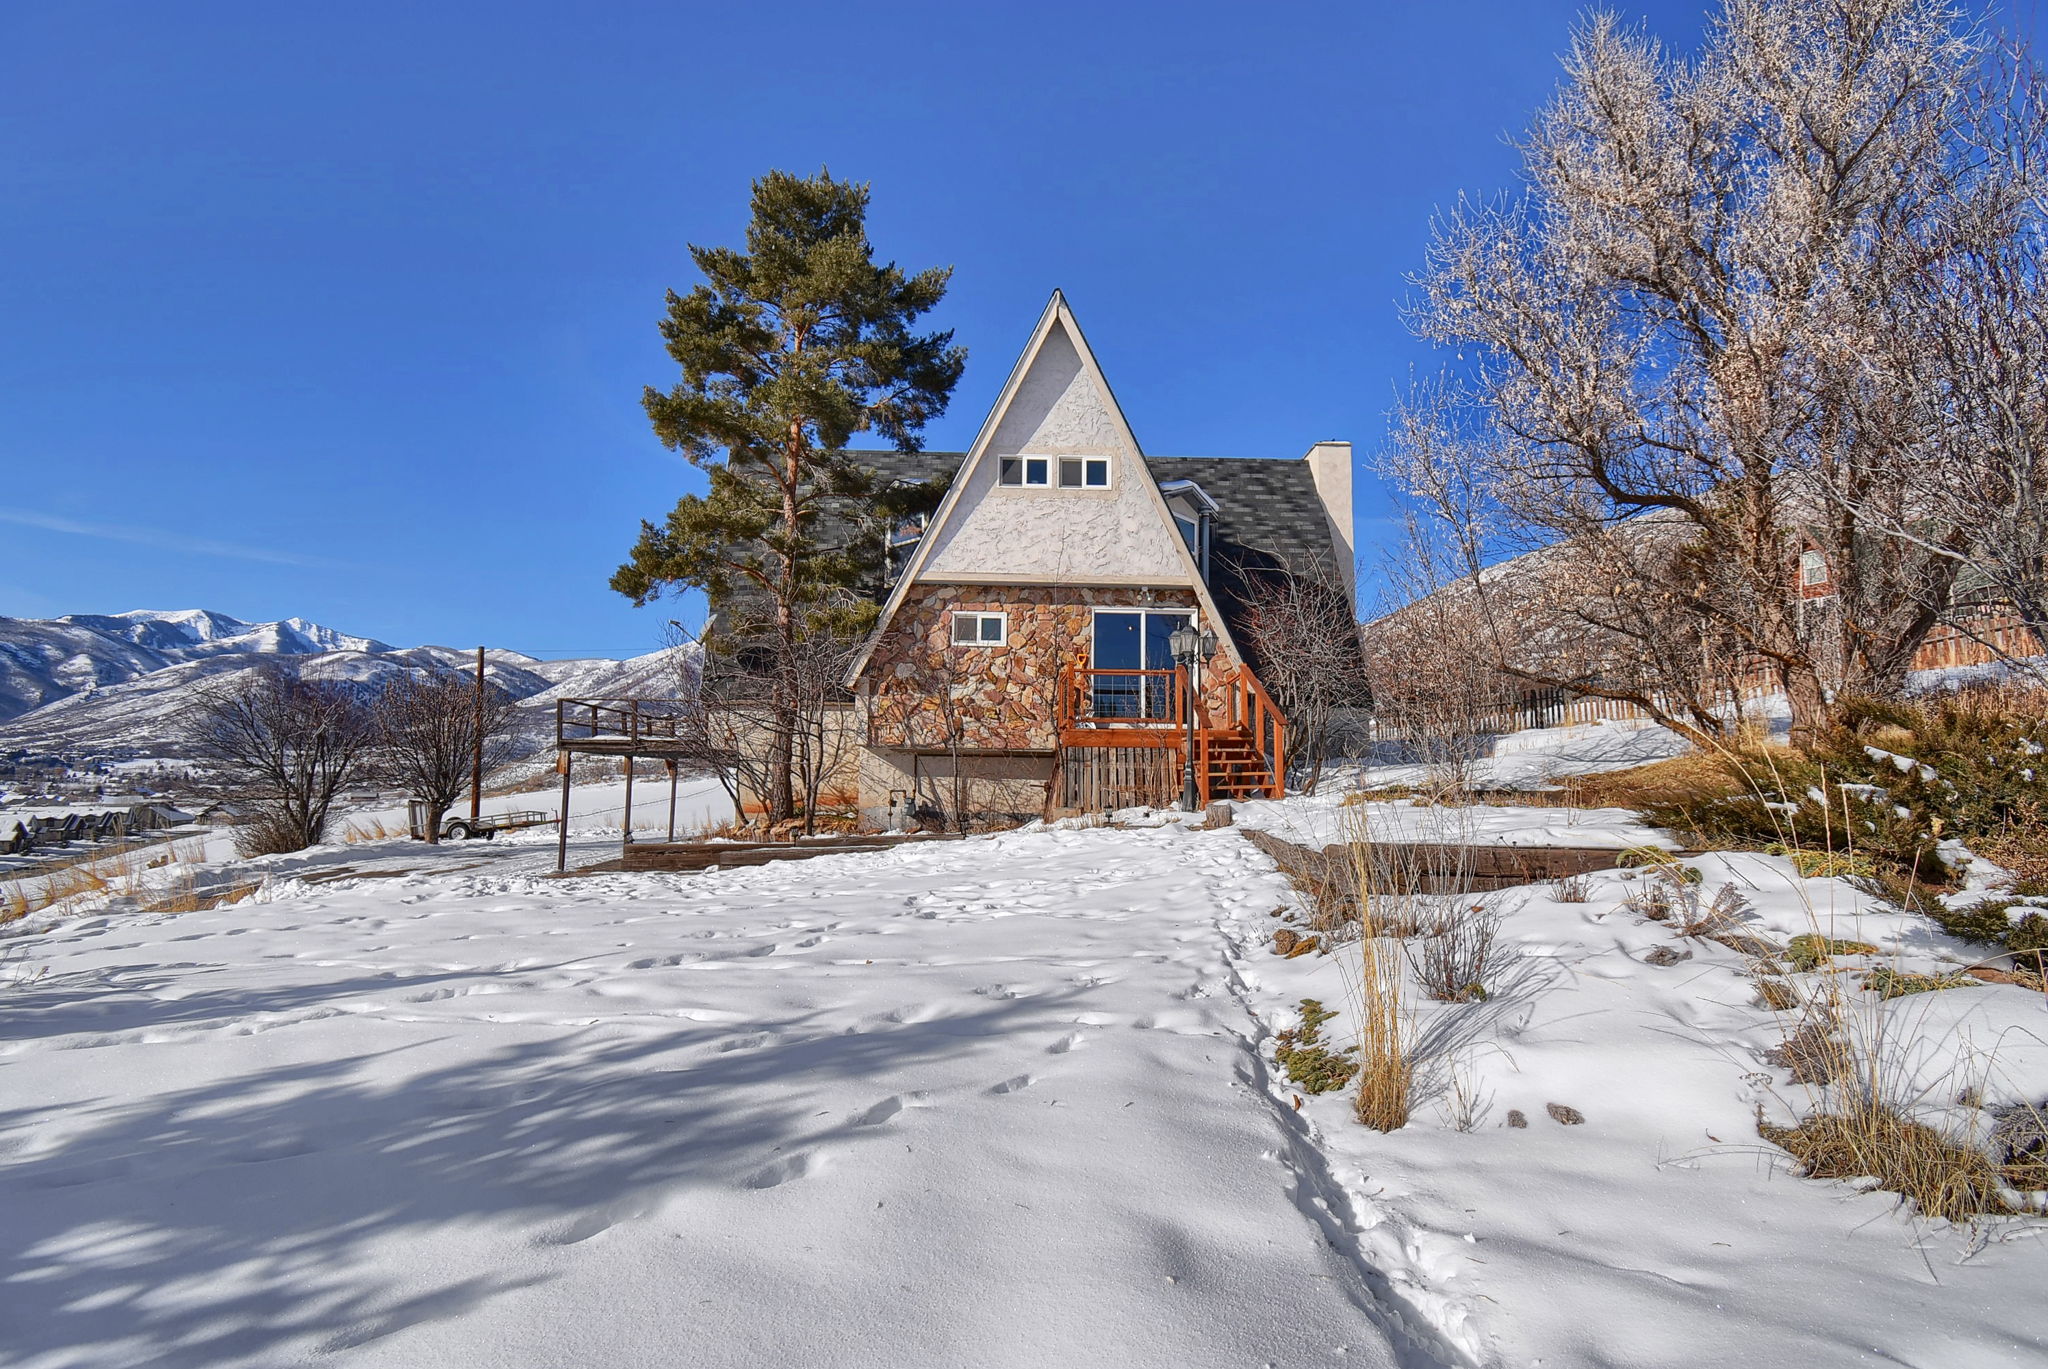  230 Edelweiss Ln, Midway, UT 84049, US Photo 39